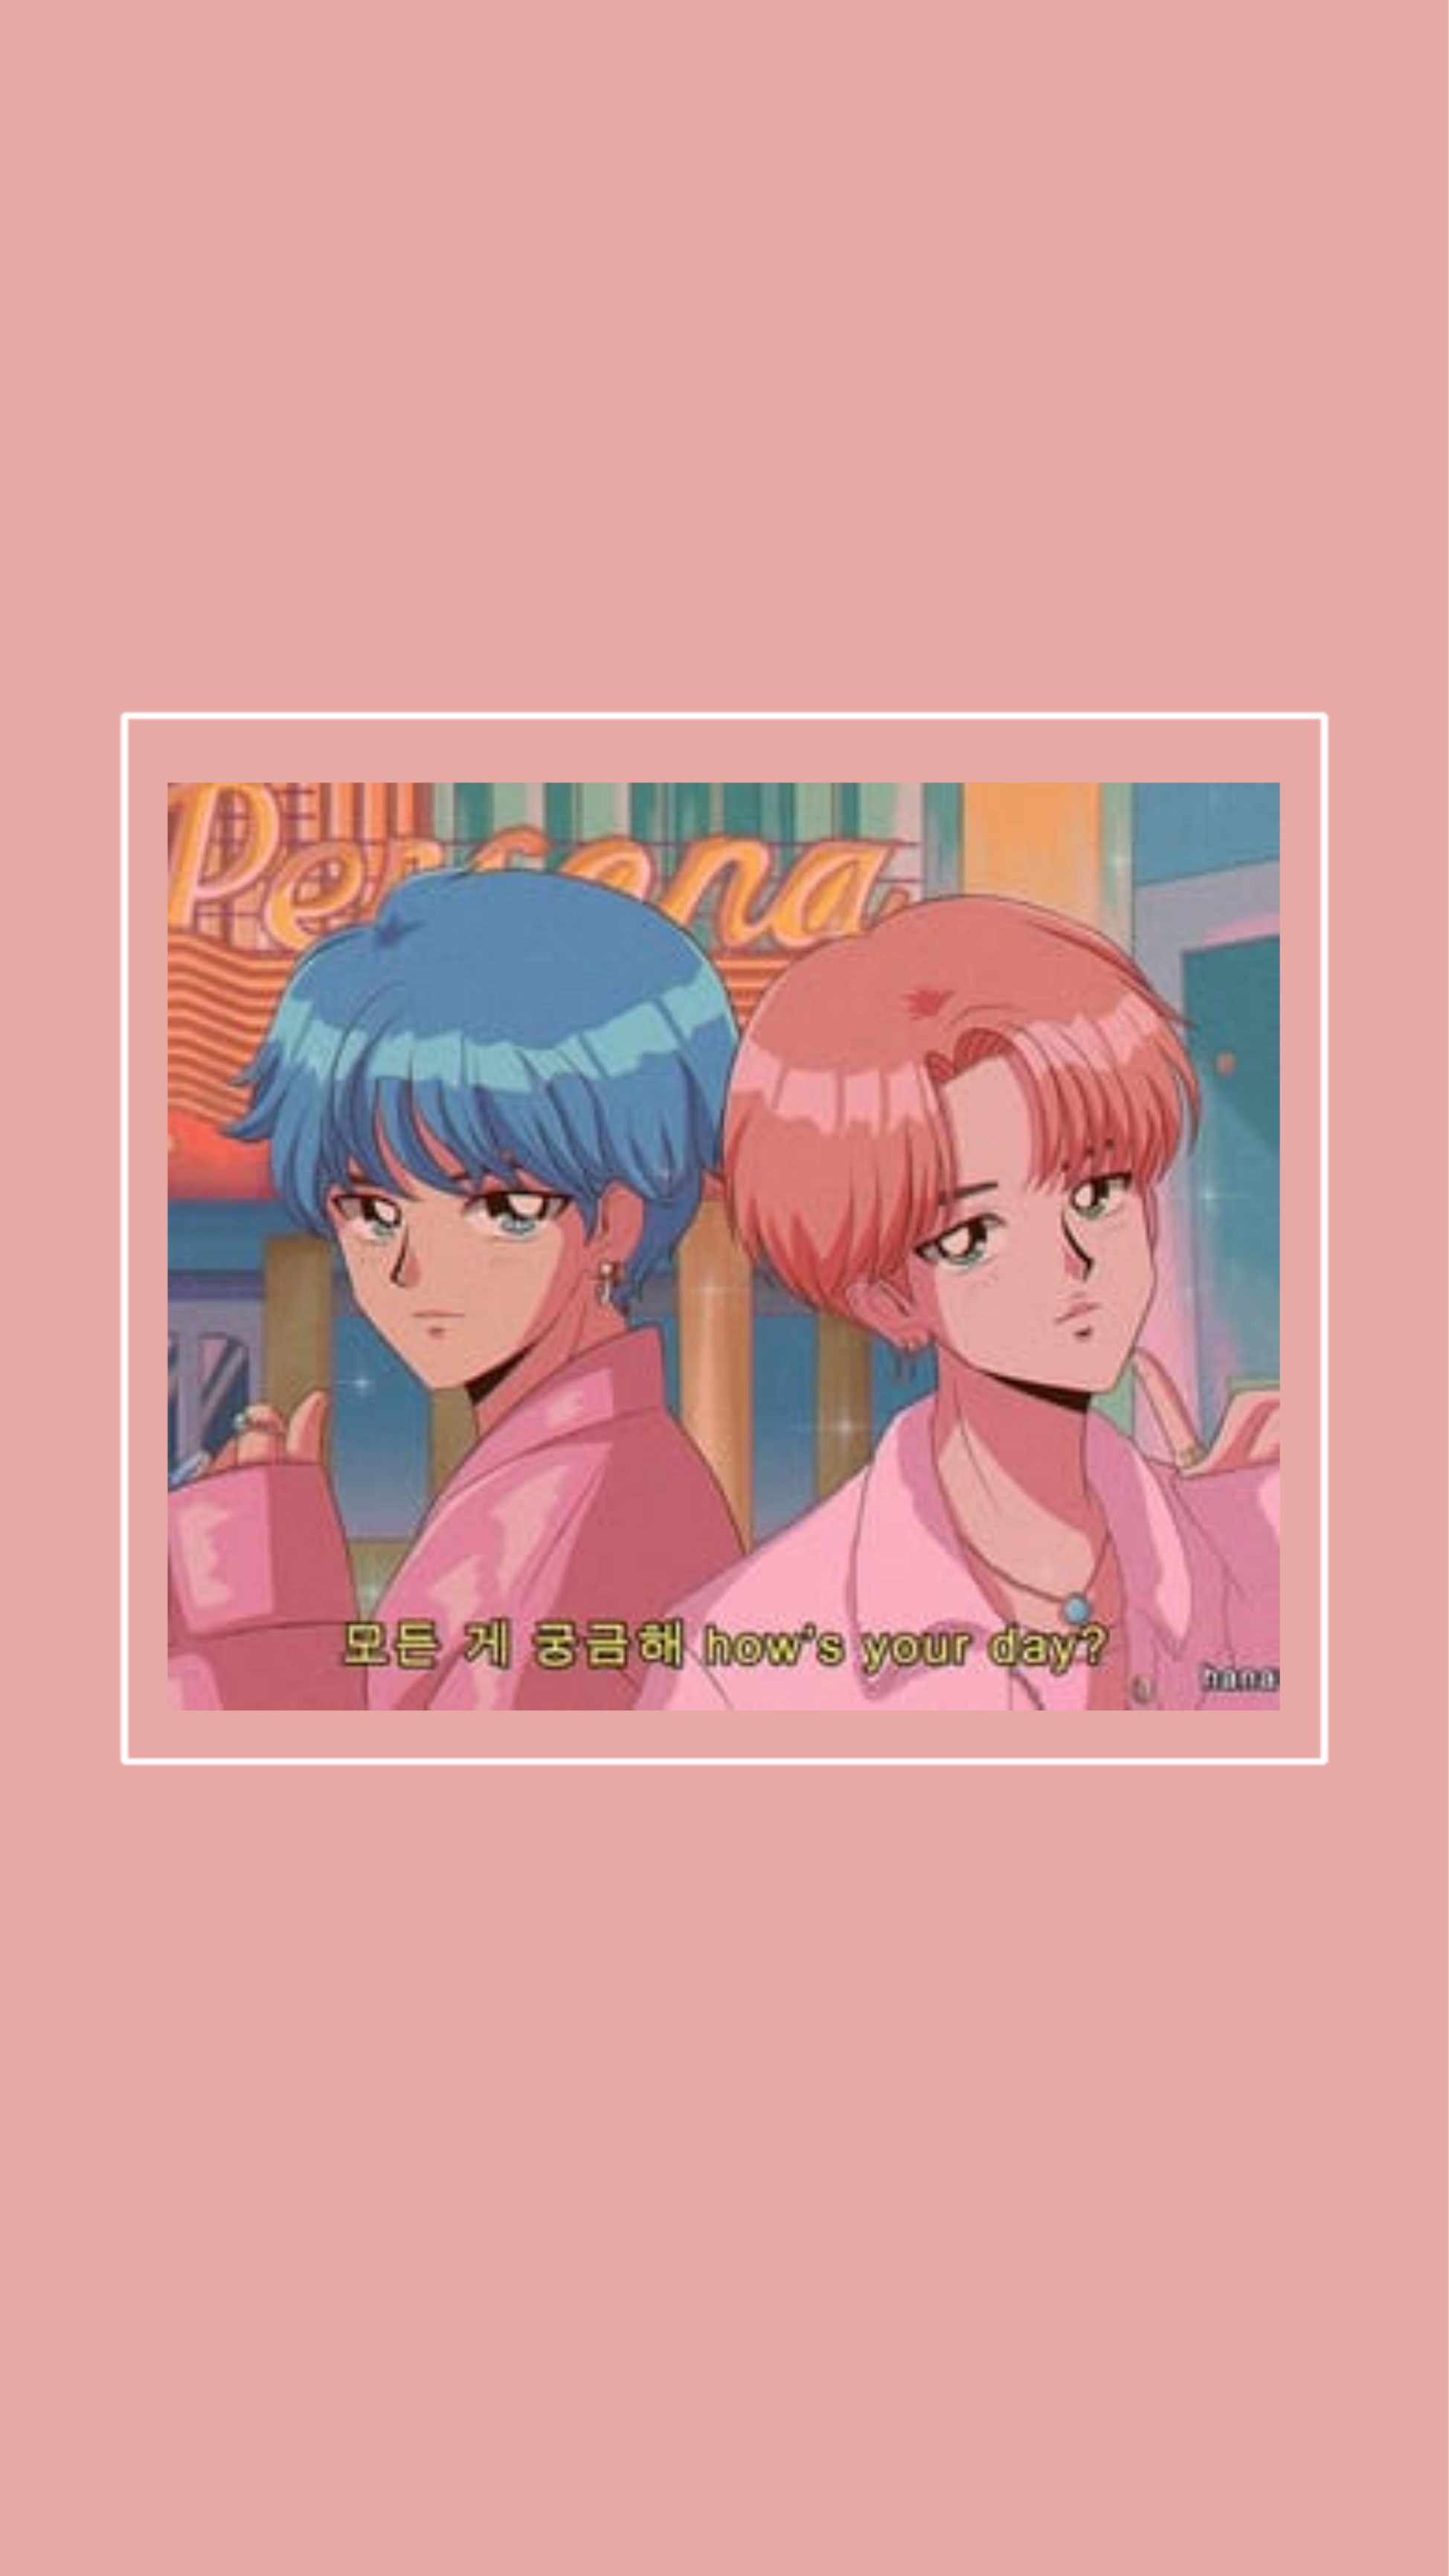 Kpop Bts 80saesthetic 80sedit Image By Lexy